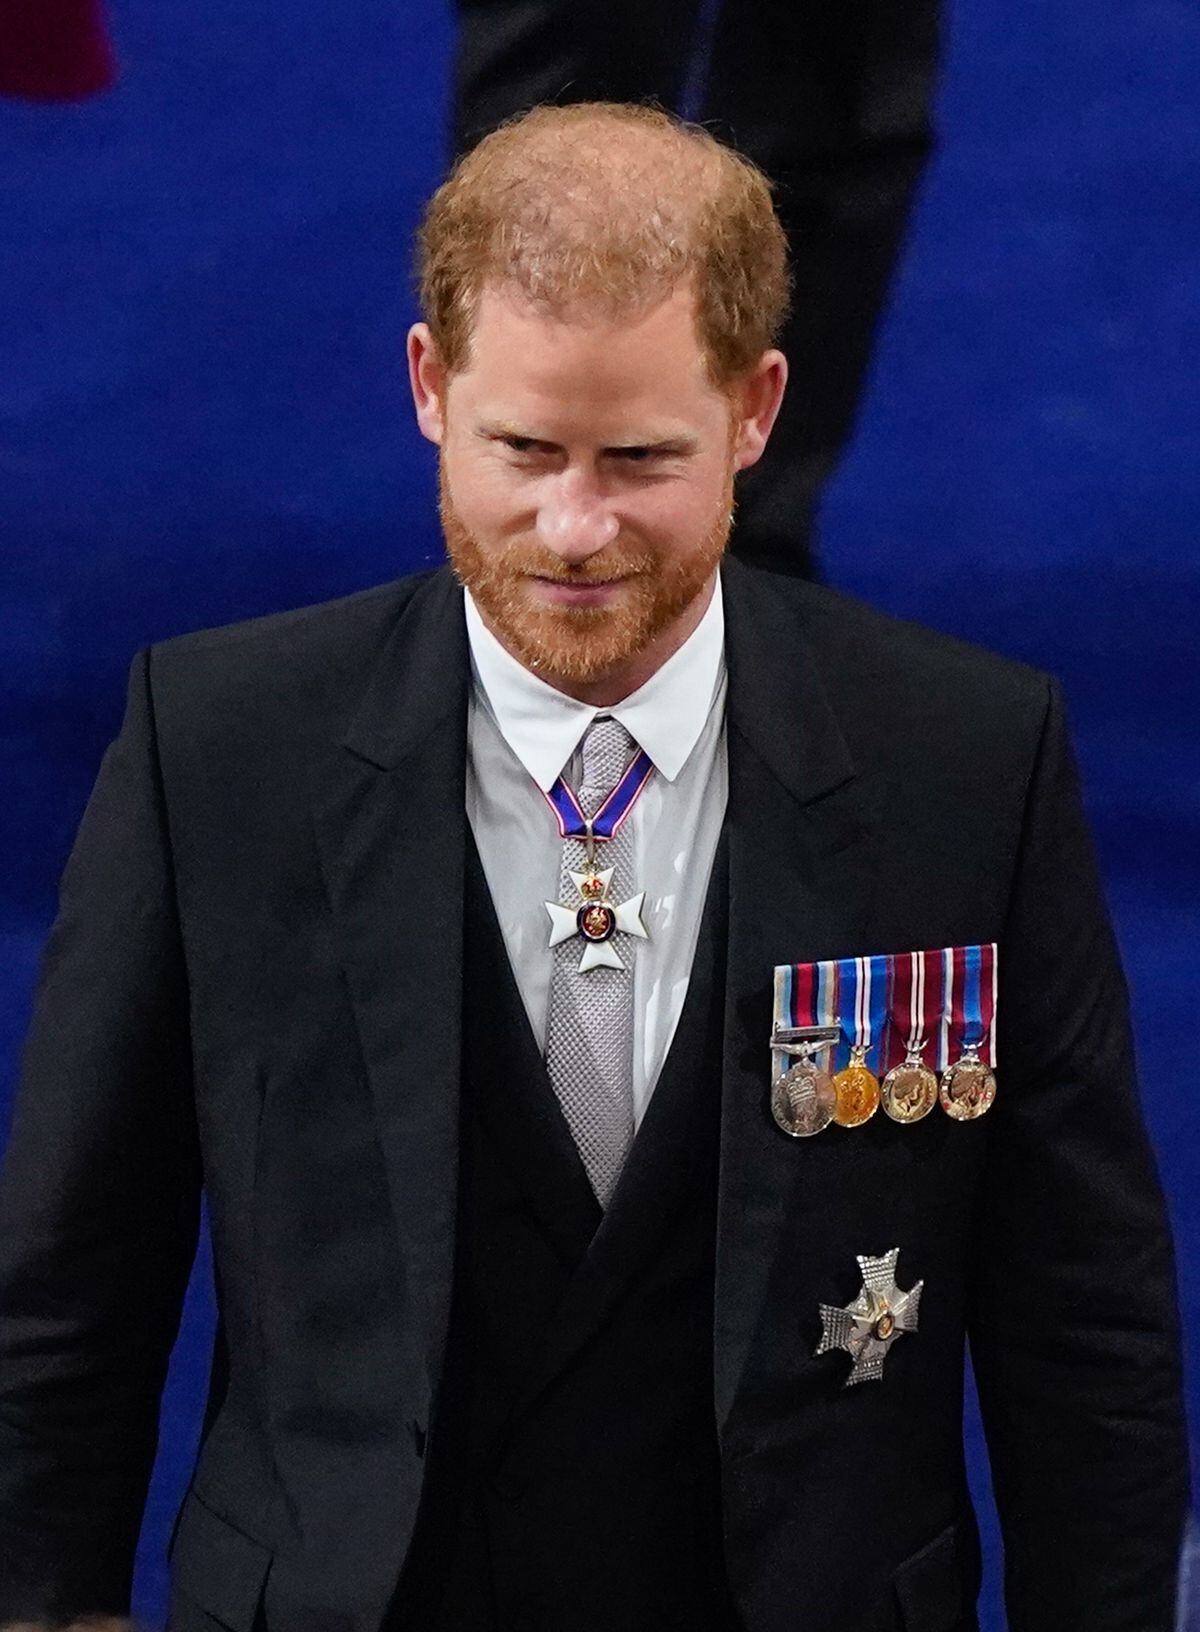 The Duke of Sussex was the nearest royal to the Mayor of Bridgnorth. Photo: Andrew Matthews/PA Wire.